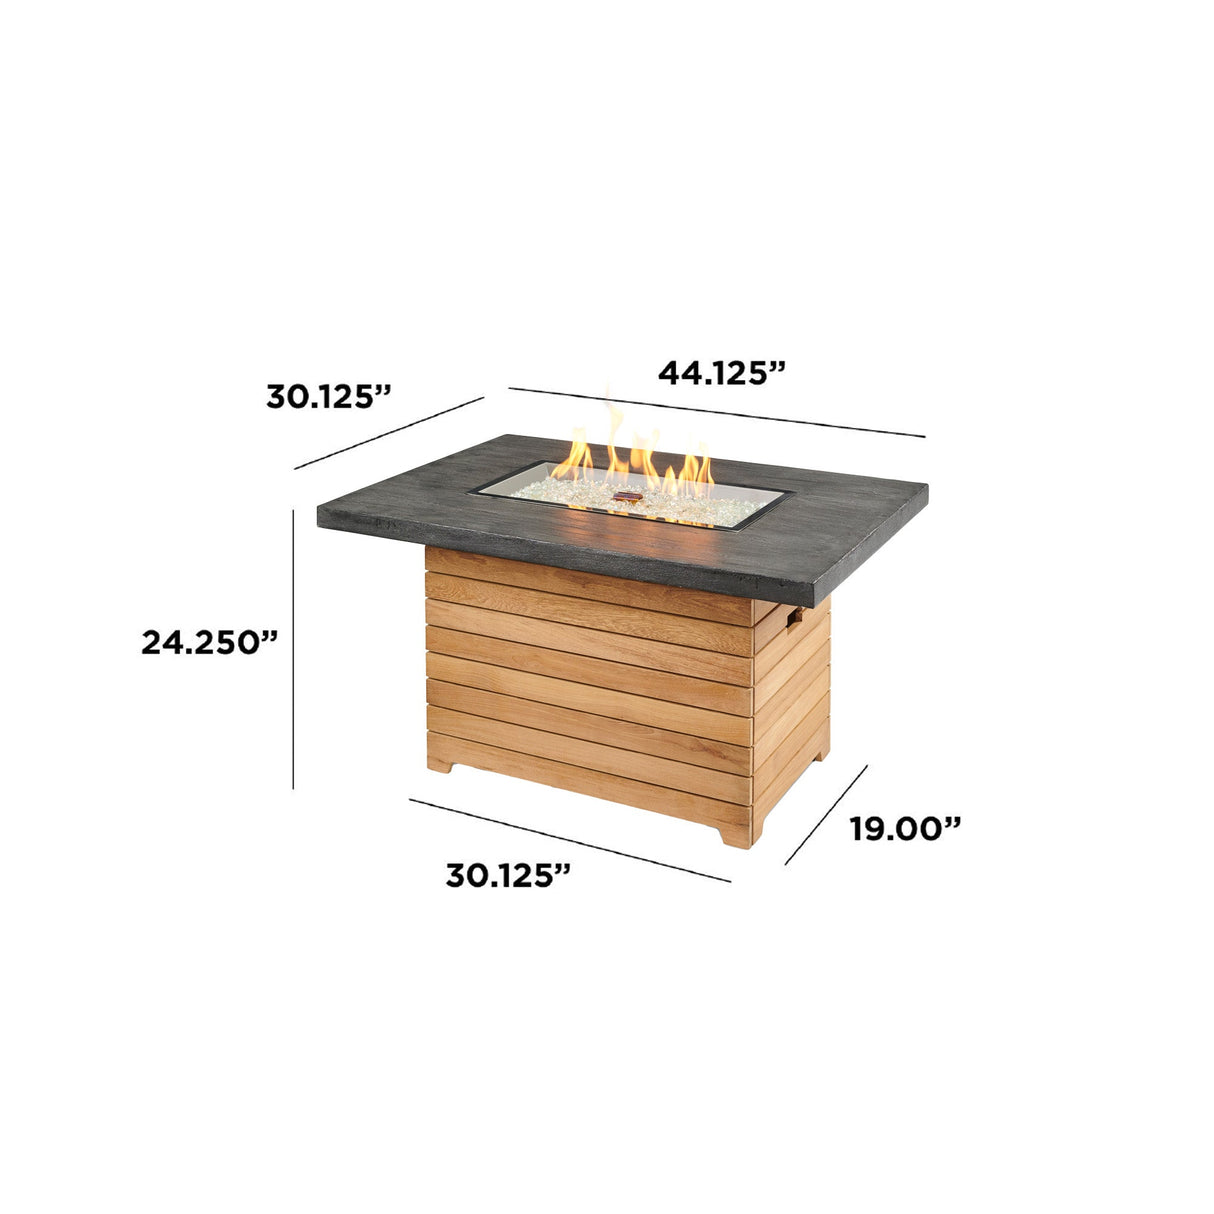 Dimensions overlaid on a Darien Rectangular Gas Fire Pit Table with an Everblend top